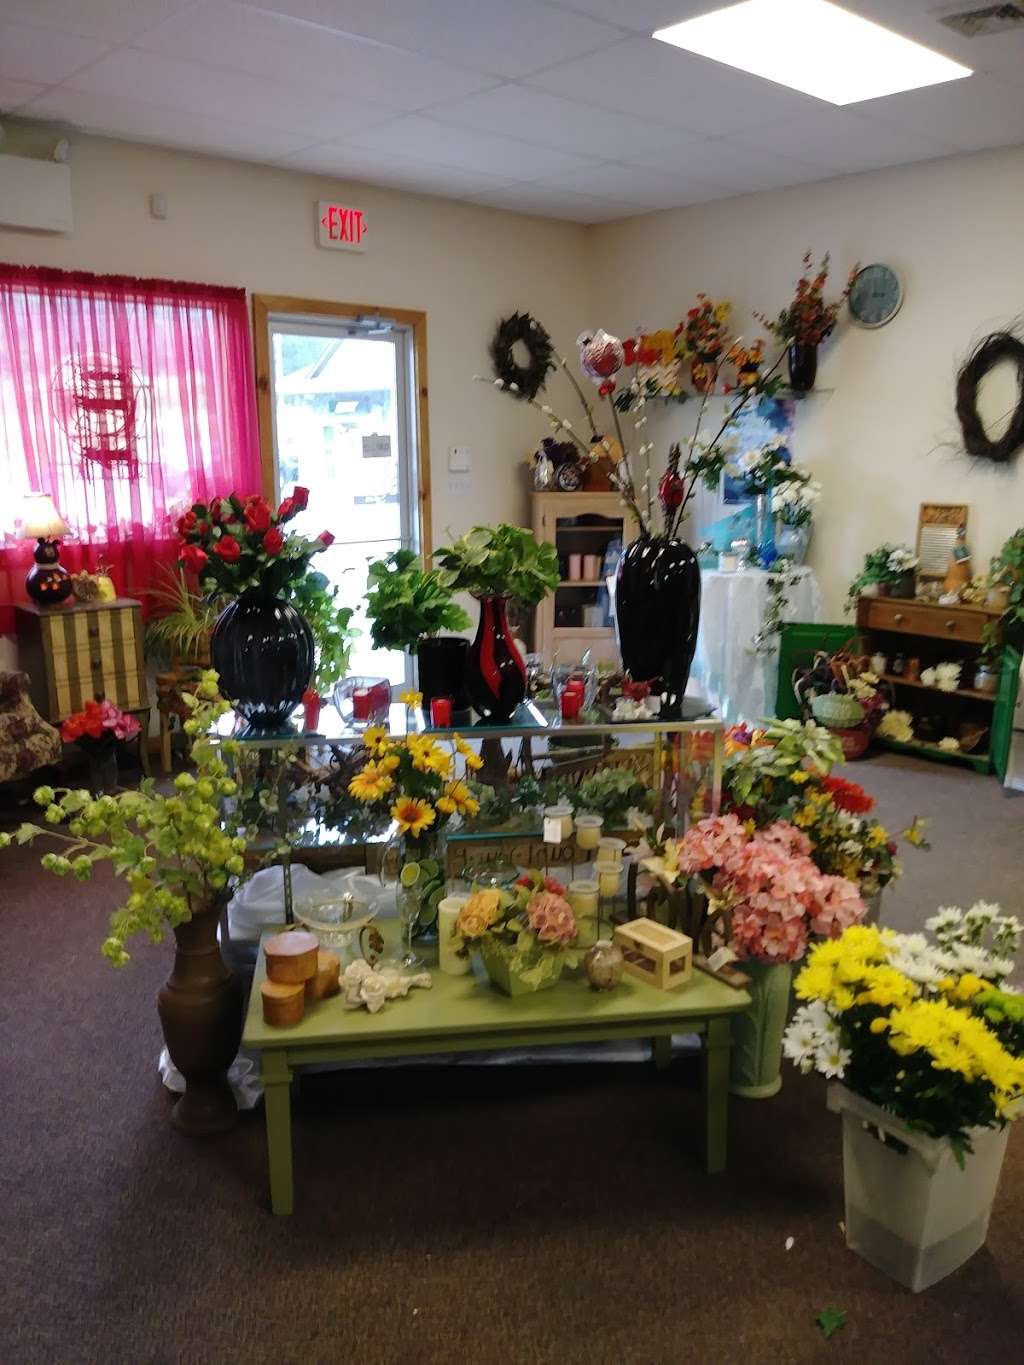 Albrightsville Floral & Gifts | 2681 PA-903 #9, Albrightsville, PA 18210 | Phone: (570) 722-2702